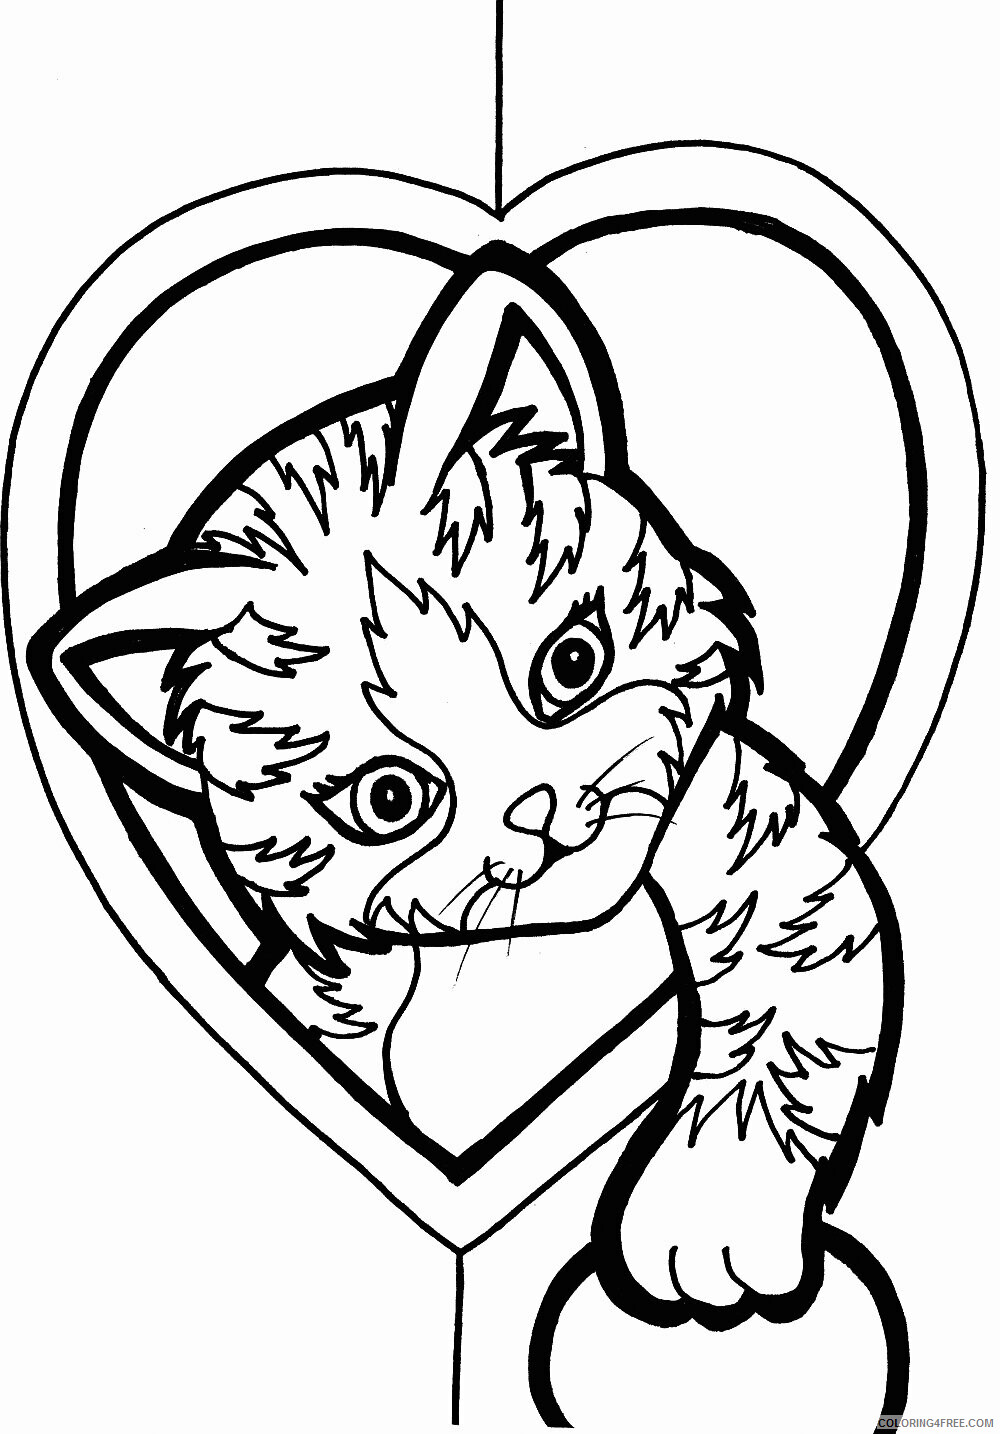 Kitten Coloring Pages Animal Printable Sheets Cute Kitten 2021 2970 Coloring4free